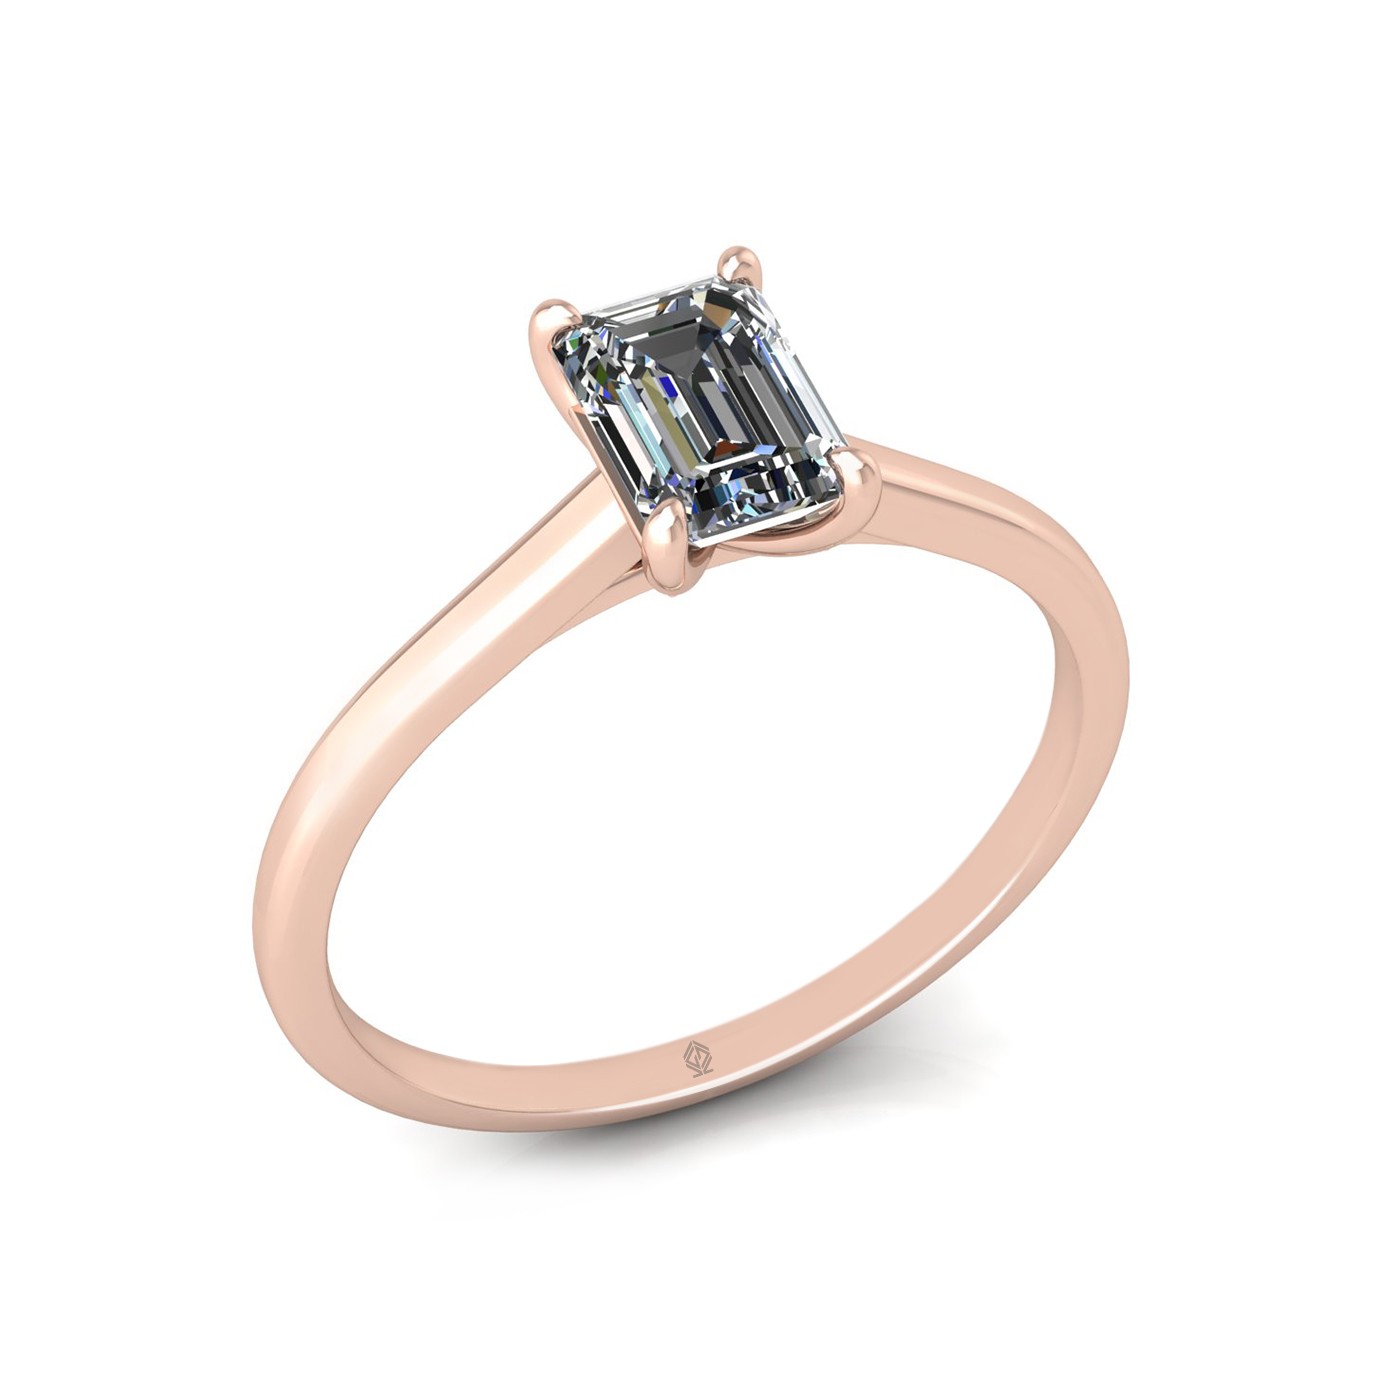 18k rose gold  0,80 ct 4 prongs solitaire emerald cut diamond engagement ring with whisper thin band